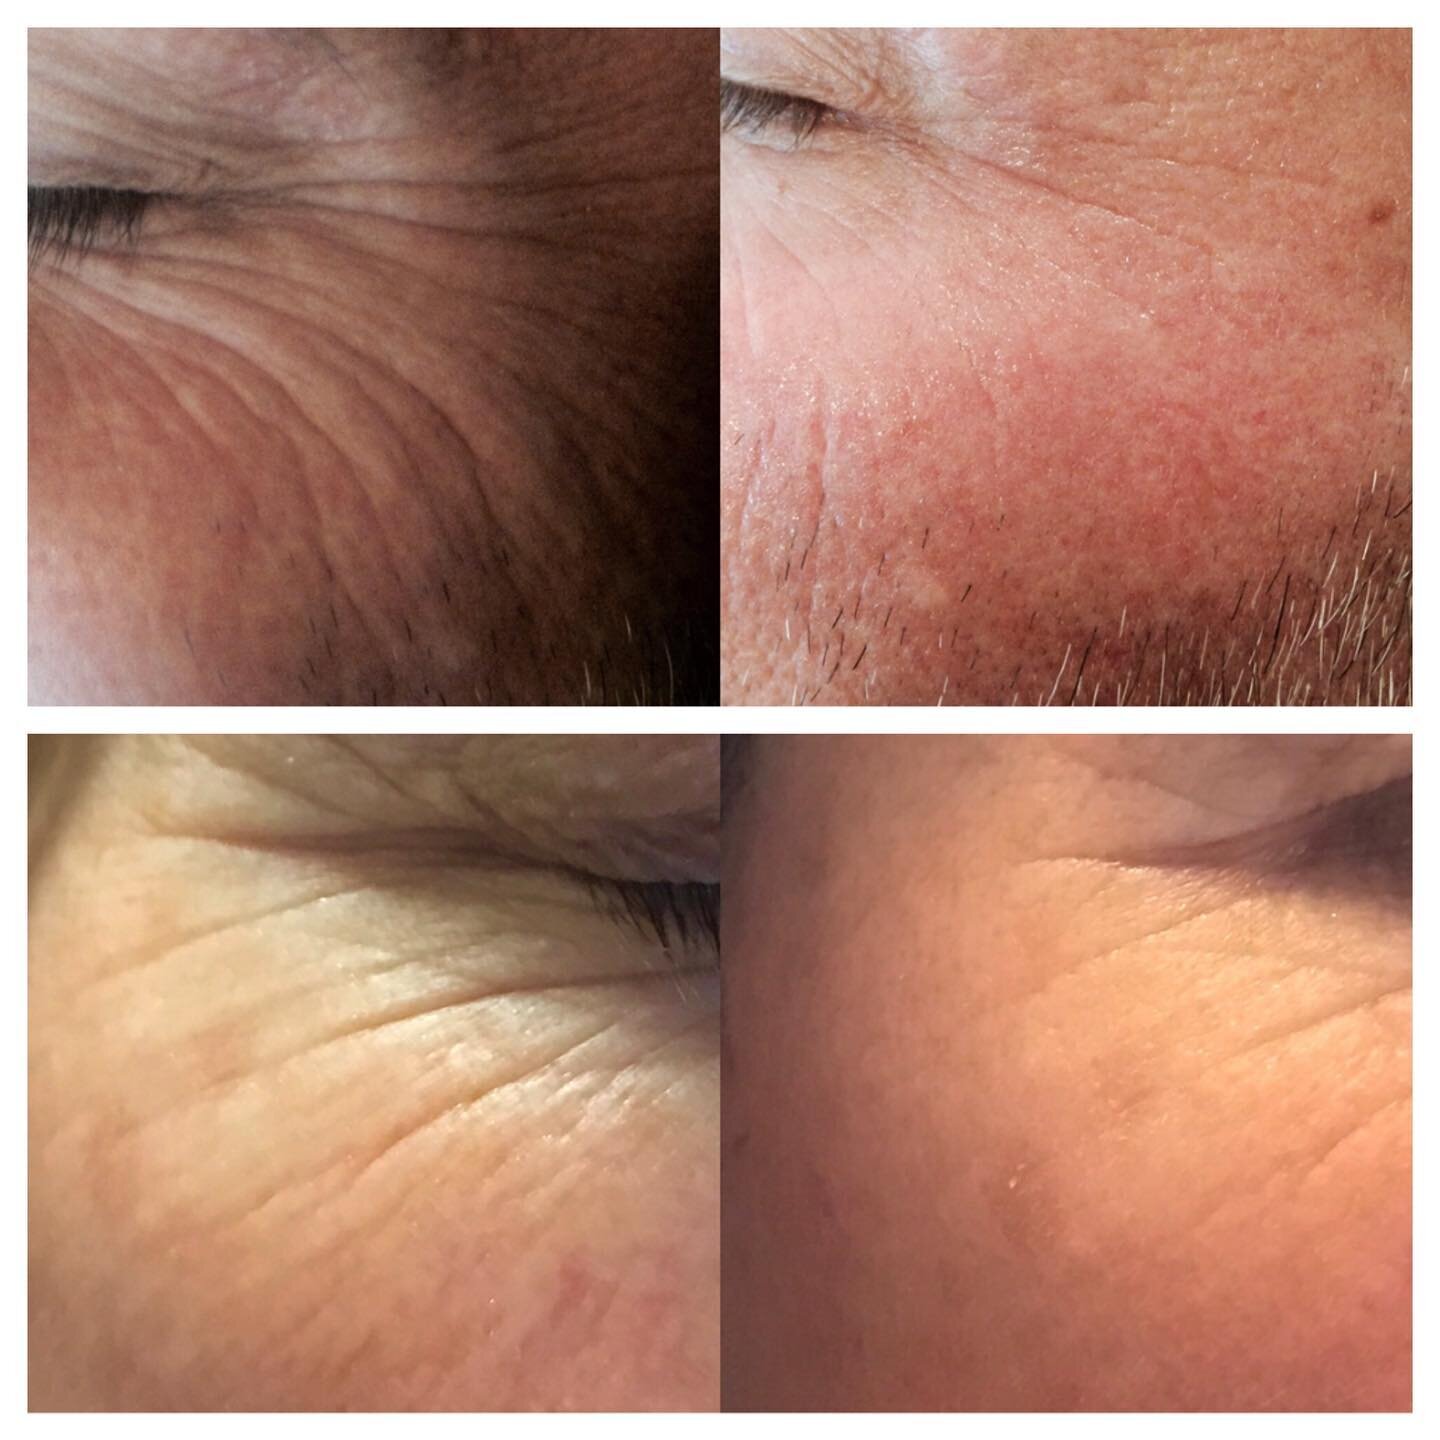 Microneedling is a skin treatment using a hand roller with tiny needles. It micro punctures the skin so that it thinks it&rsquo;s injured &amp; thus promotes cellular turnover of new skin &amp; more collagen.

The top pic of my work has been publishe